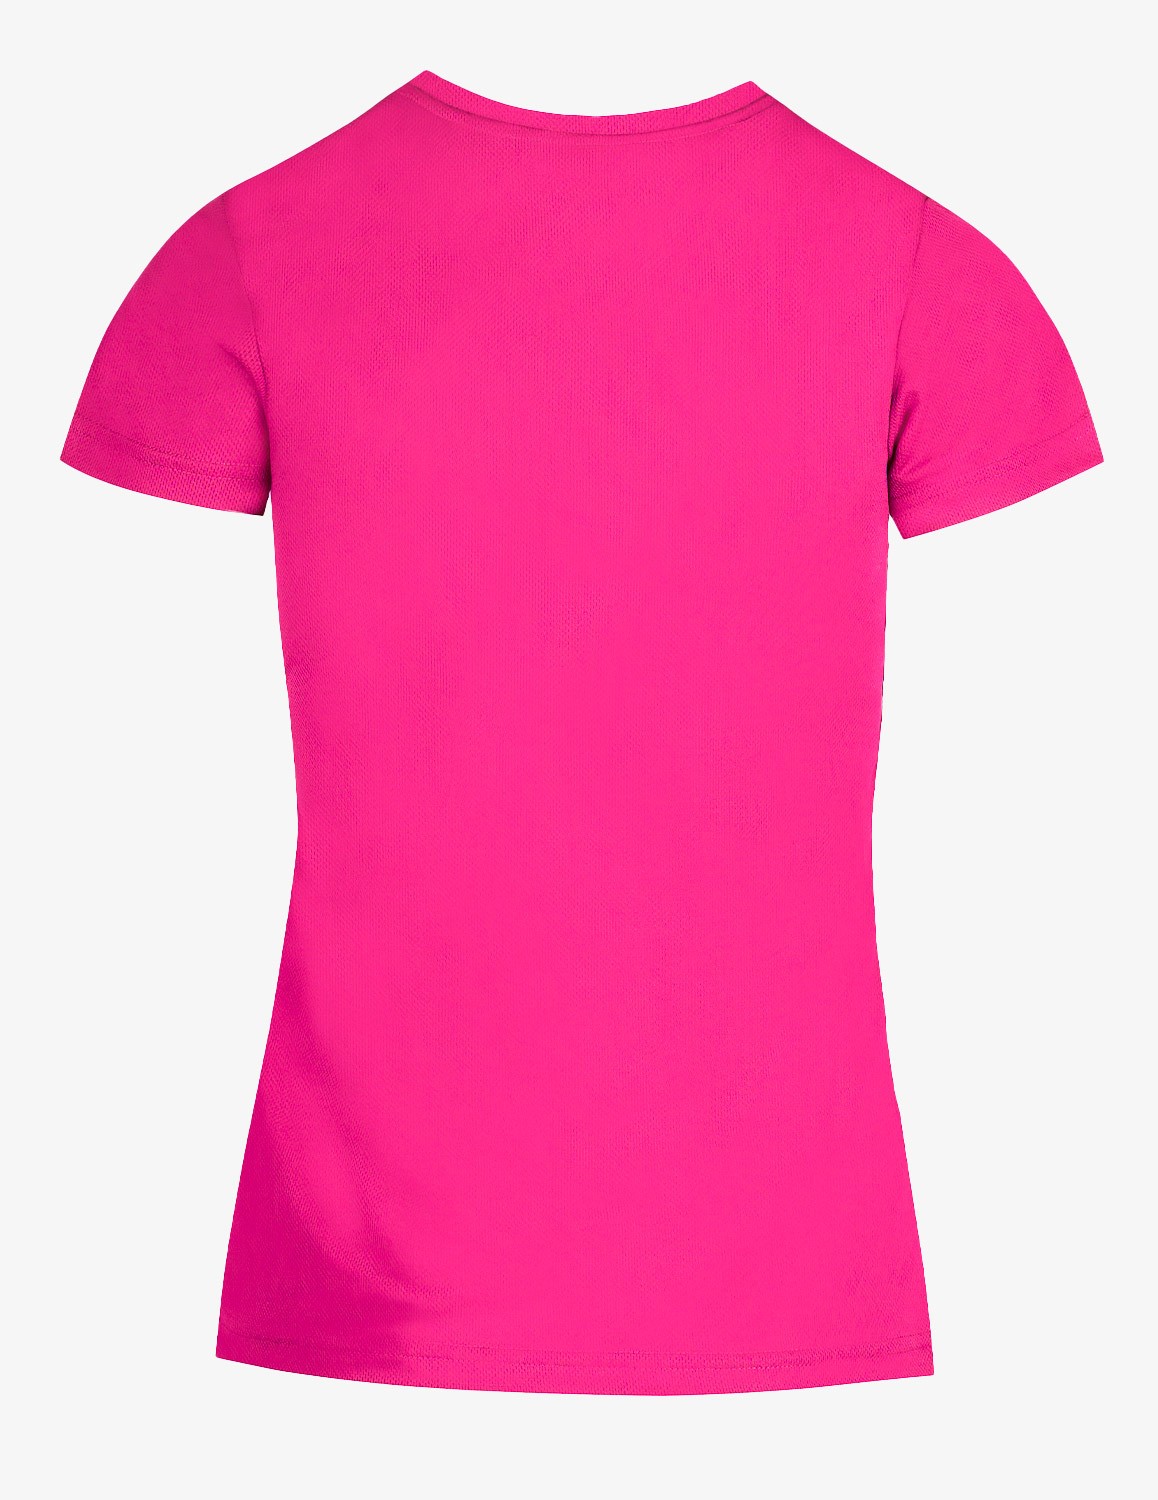 T-shirt SPORT IS YOUR GANG™ AIR TECH-FIT+ Neon Pink